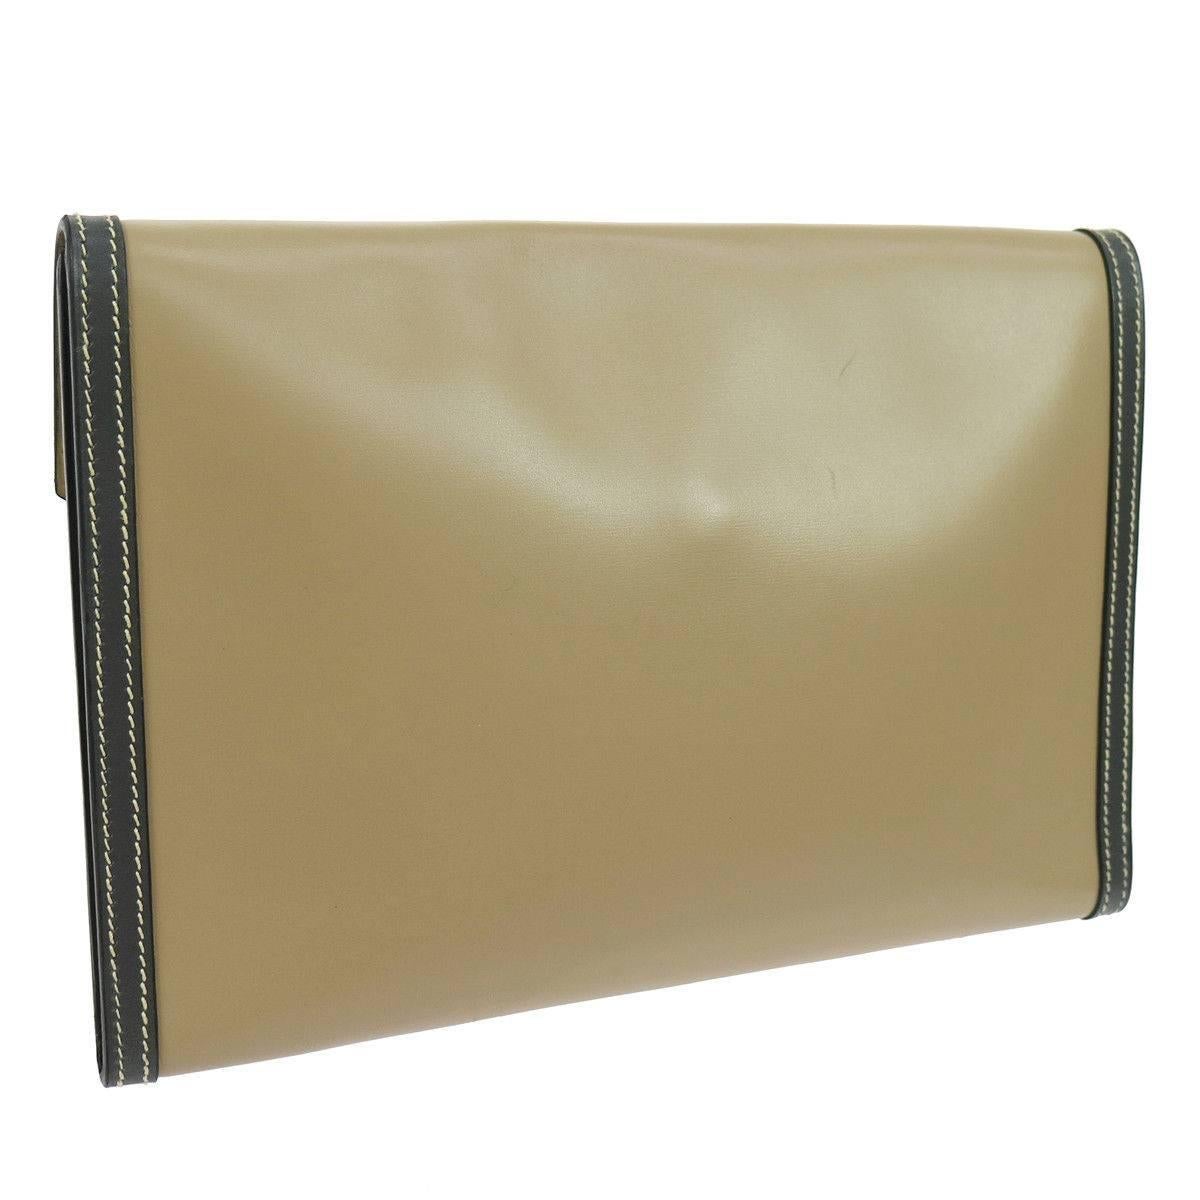 Hermes Rare Taupe Leather Envelope Evening Flap Clutch Bag in Dust Bag 

Leather
Leather lining
Snap closure
Made in France
Measures 9.5